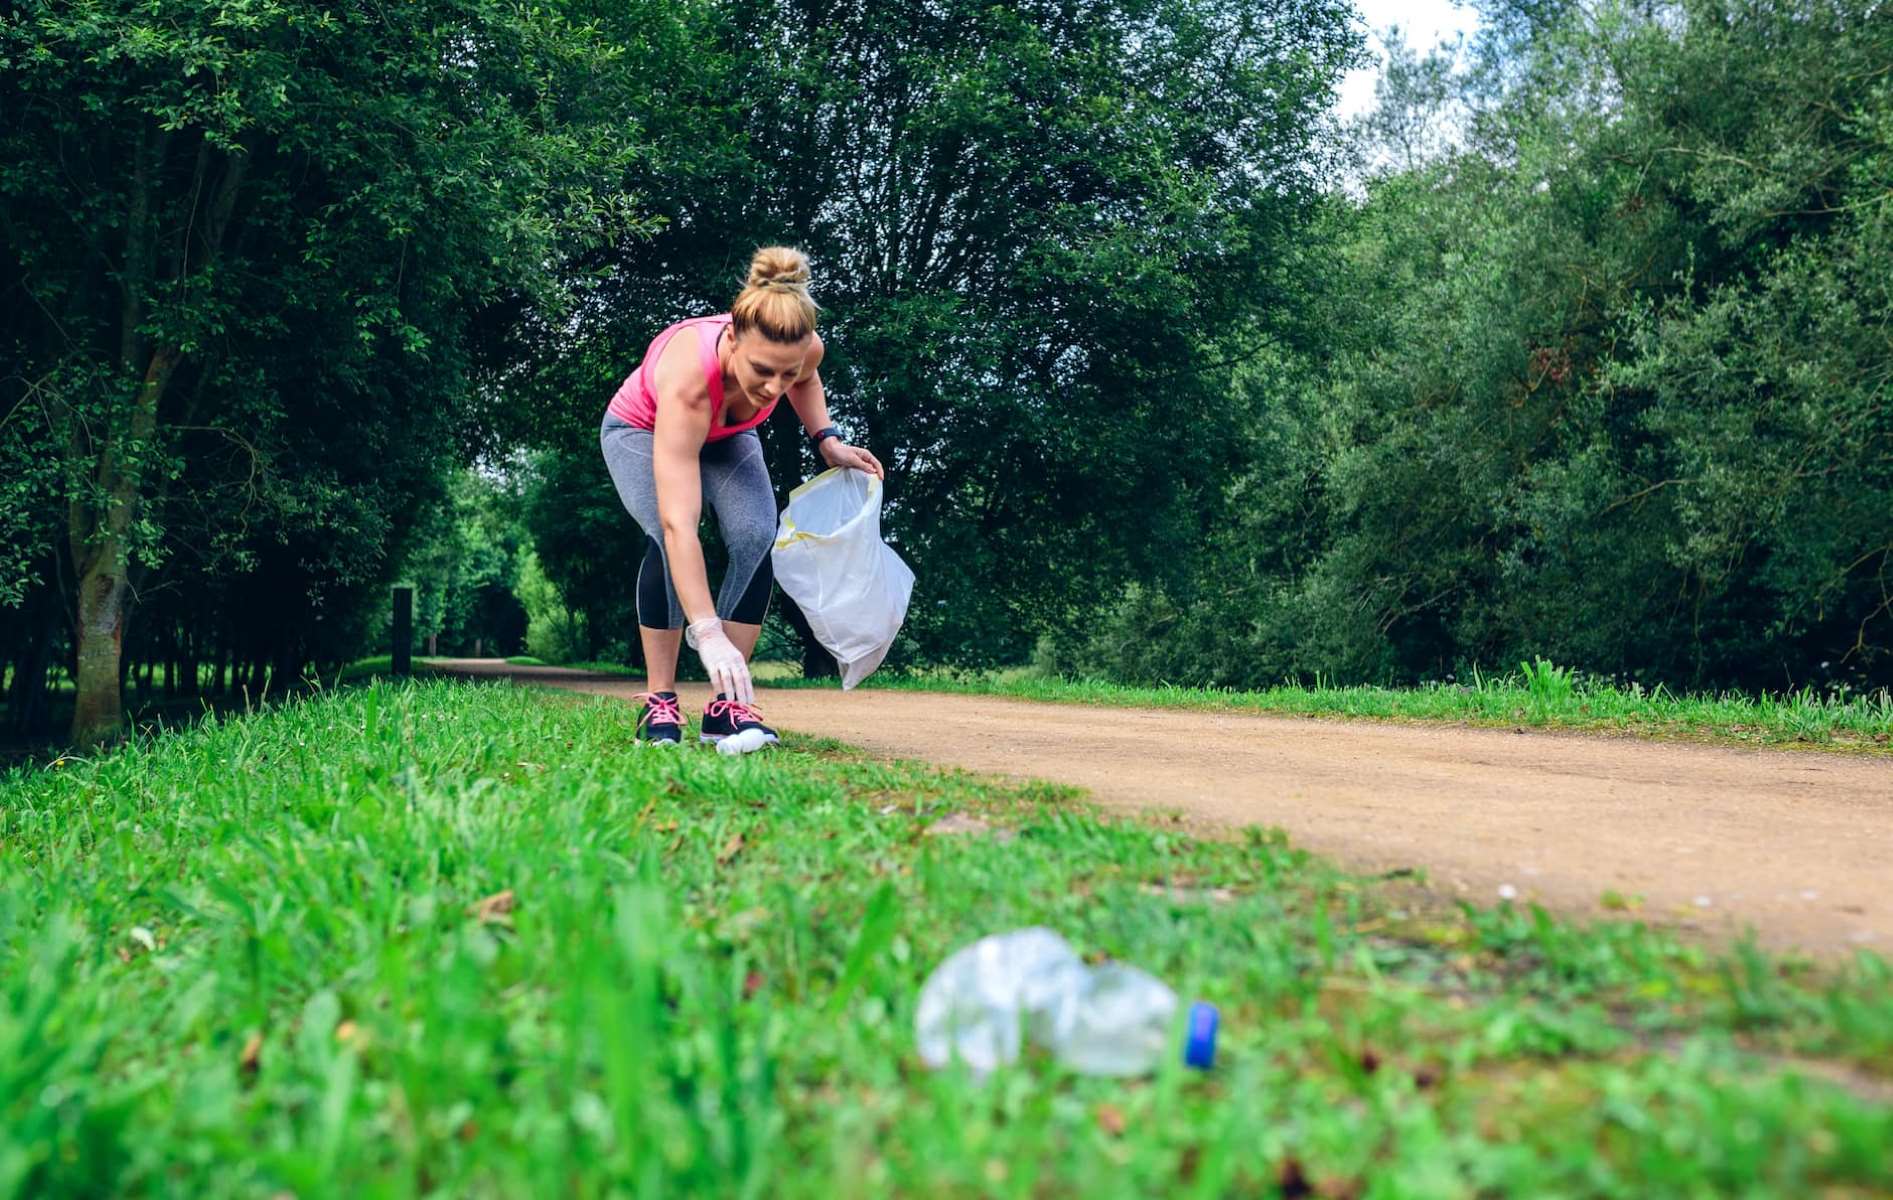 Plogging: The Trendy Running Craze That's Helping The Environment